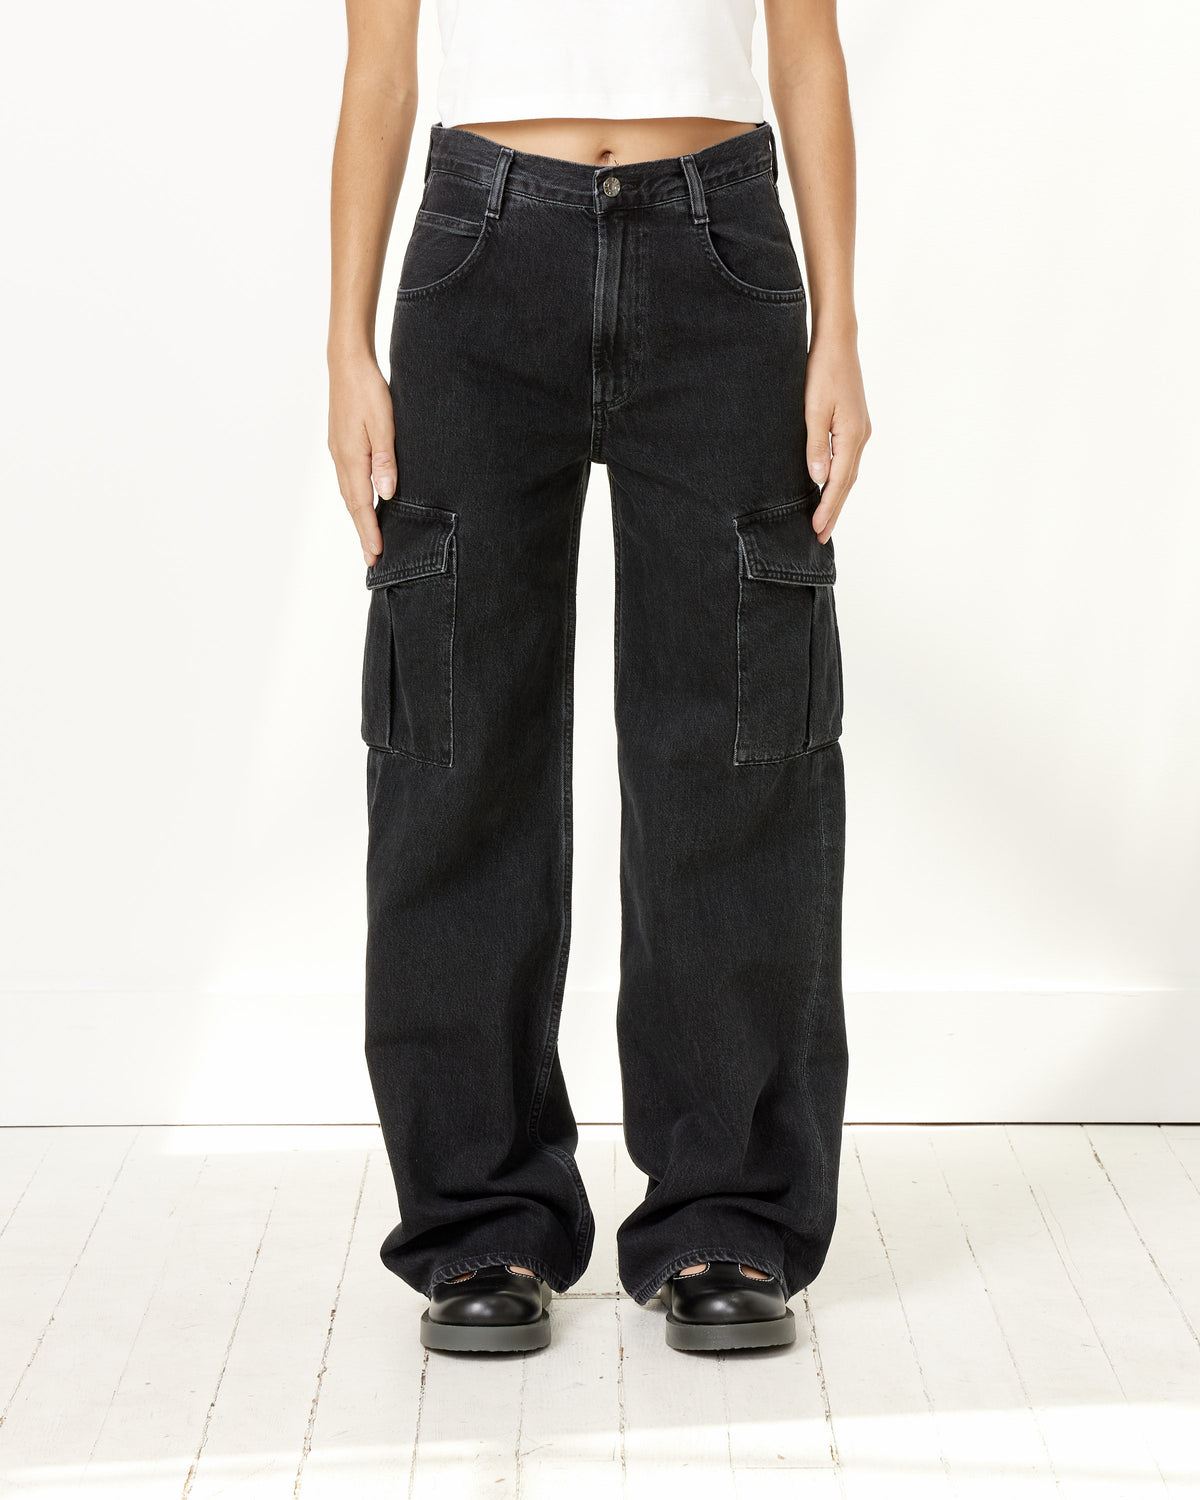 We have the best prices and Premium Minka Cargo Jean AGOLDE on our website